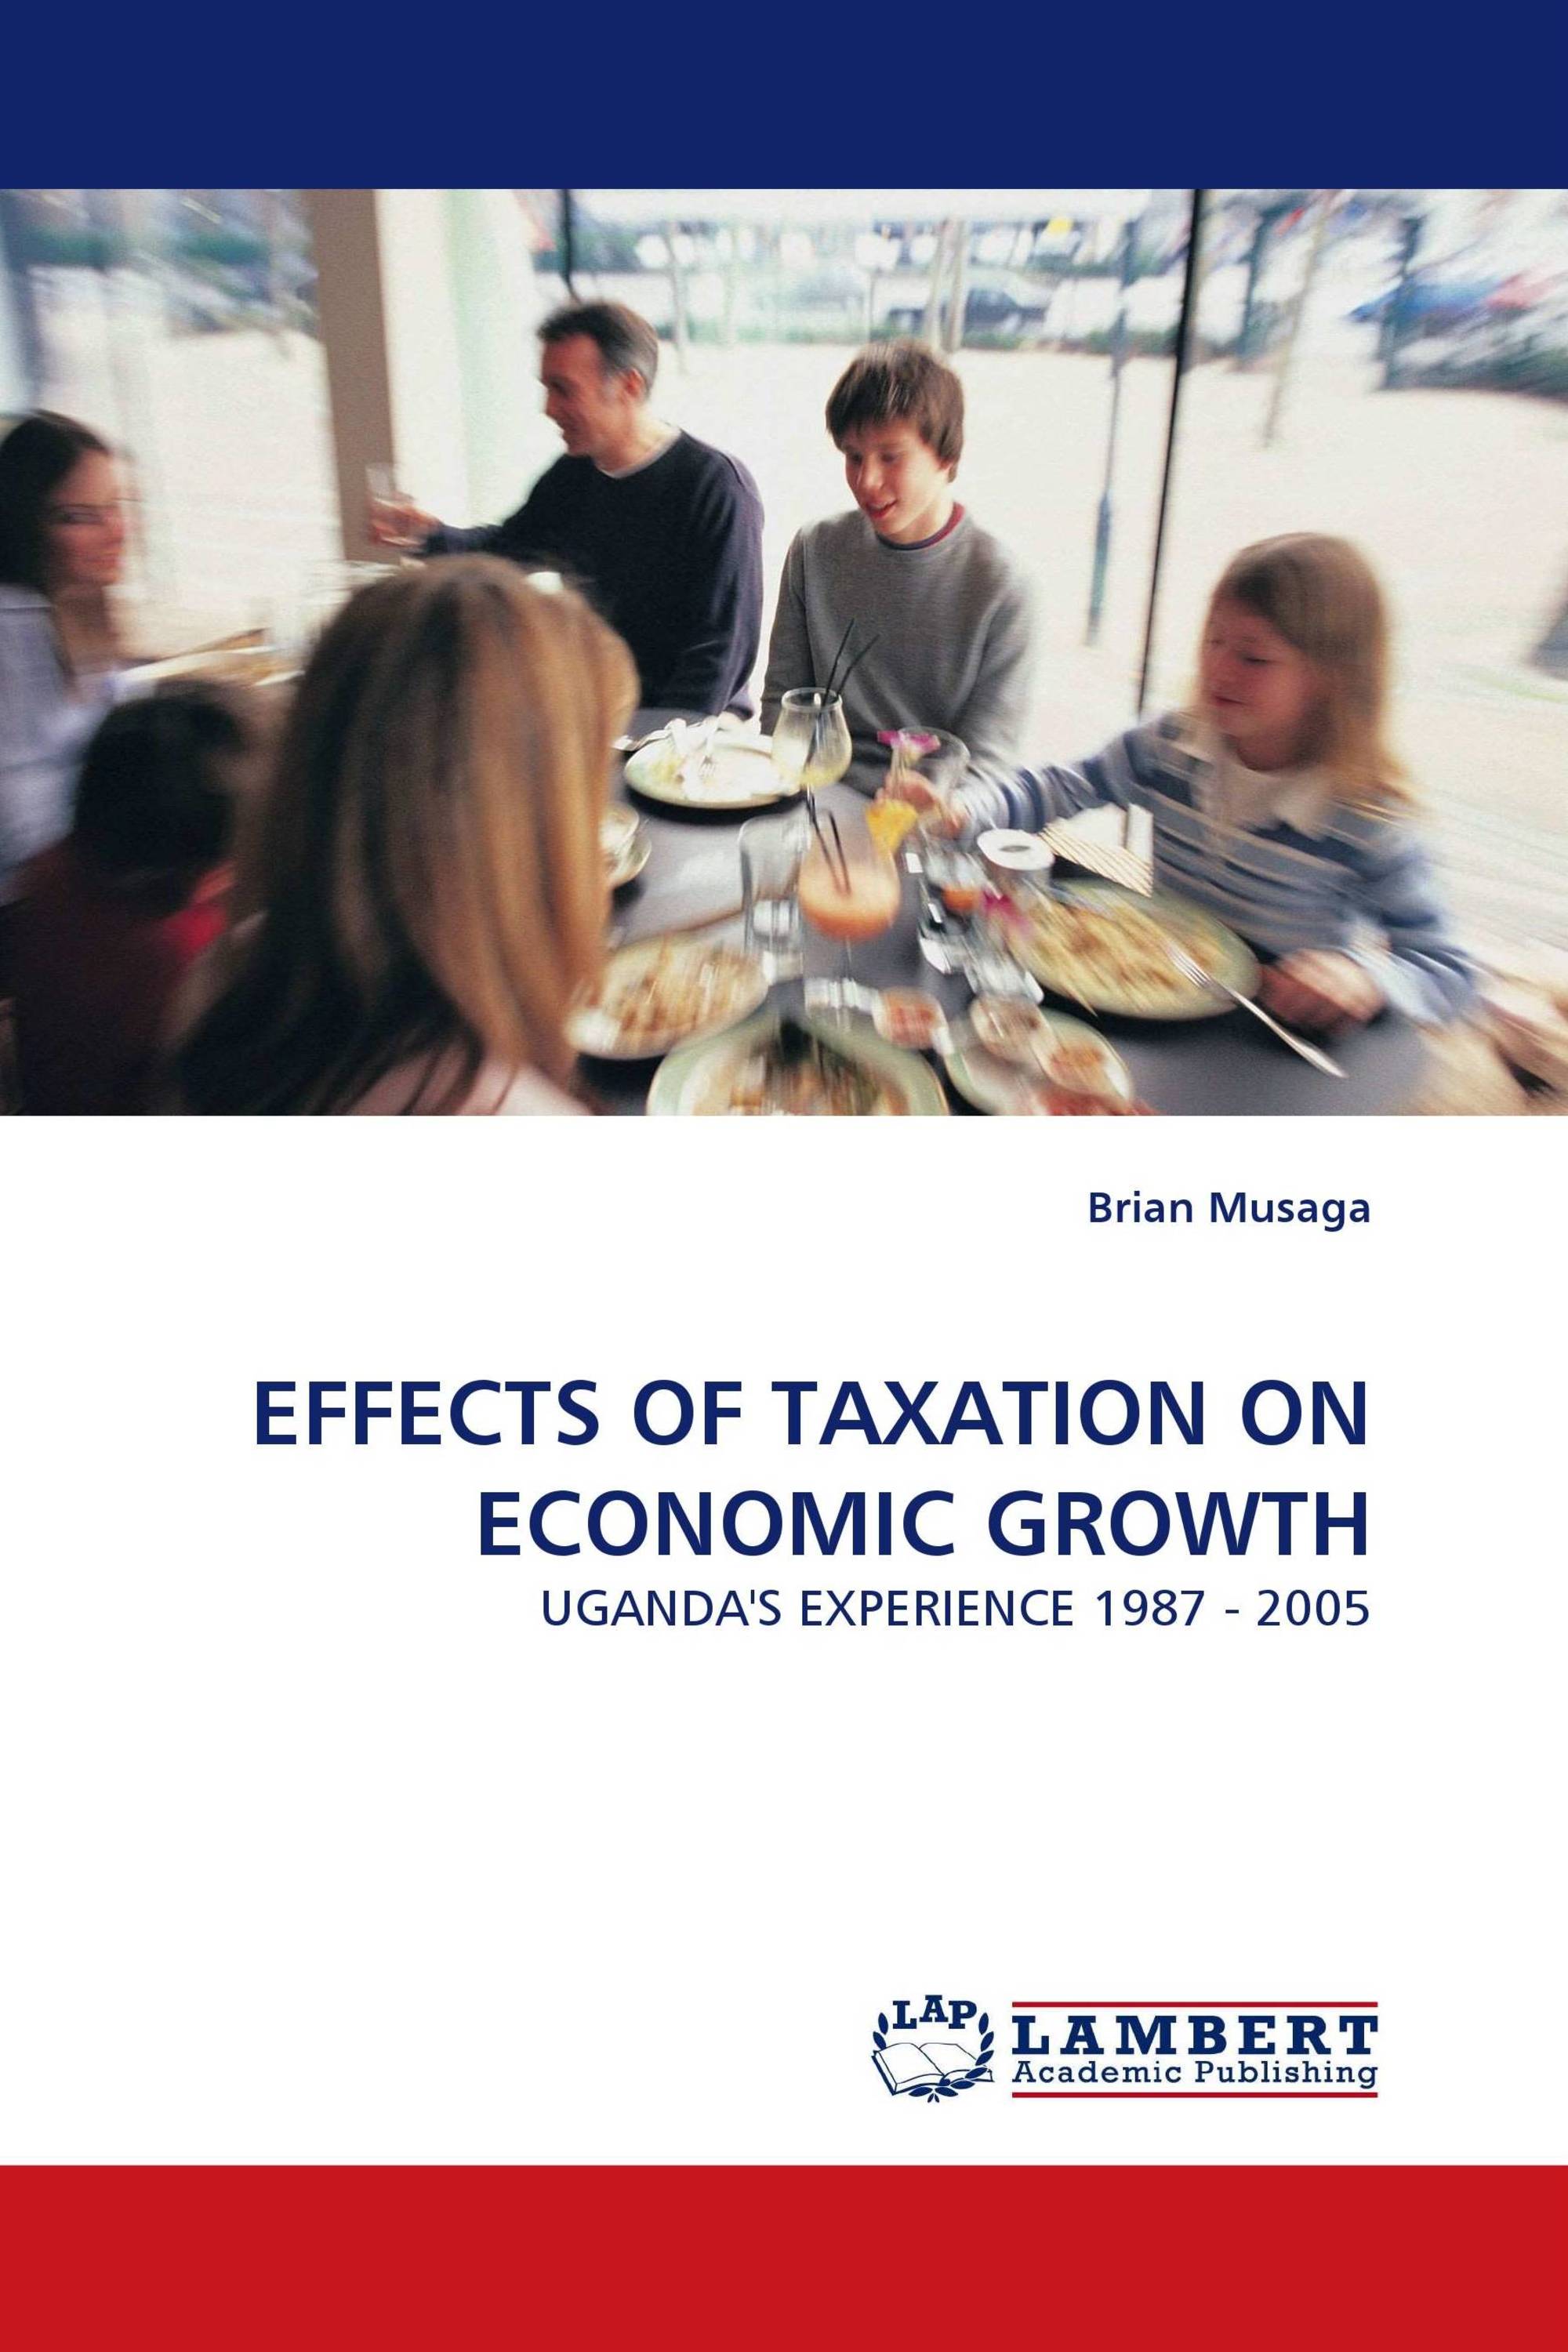 EFFECTS OF TAXATION ON ECONOMIC GROWTH